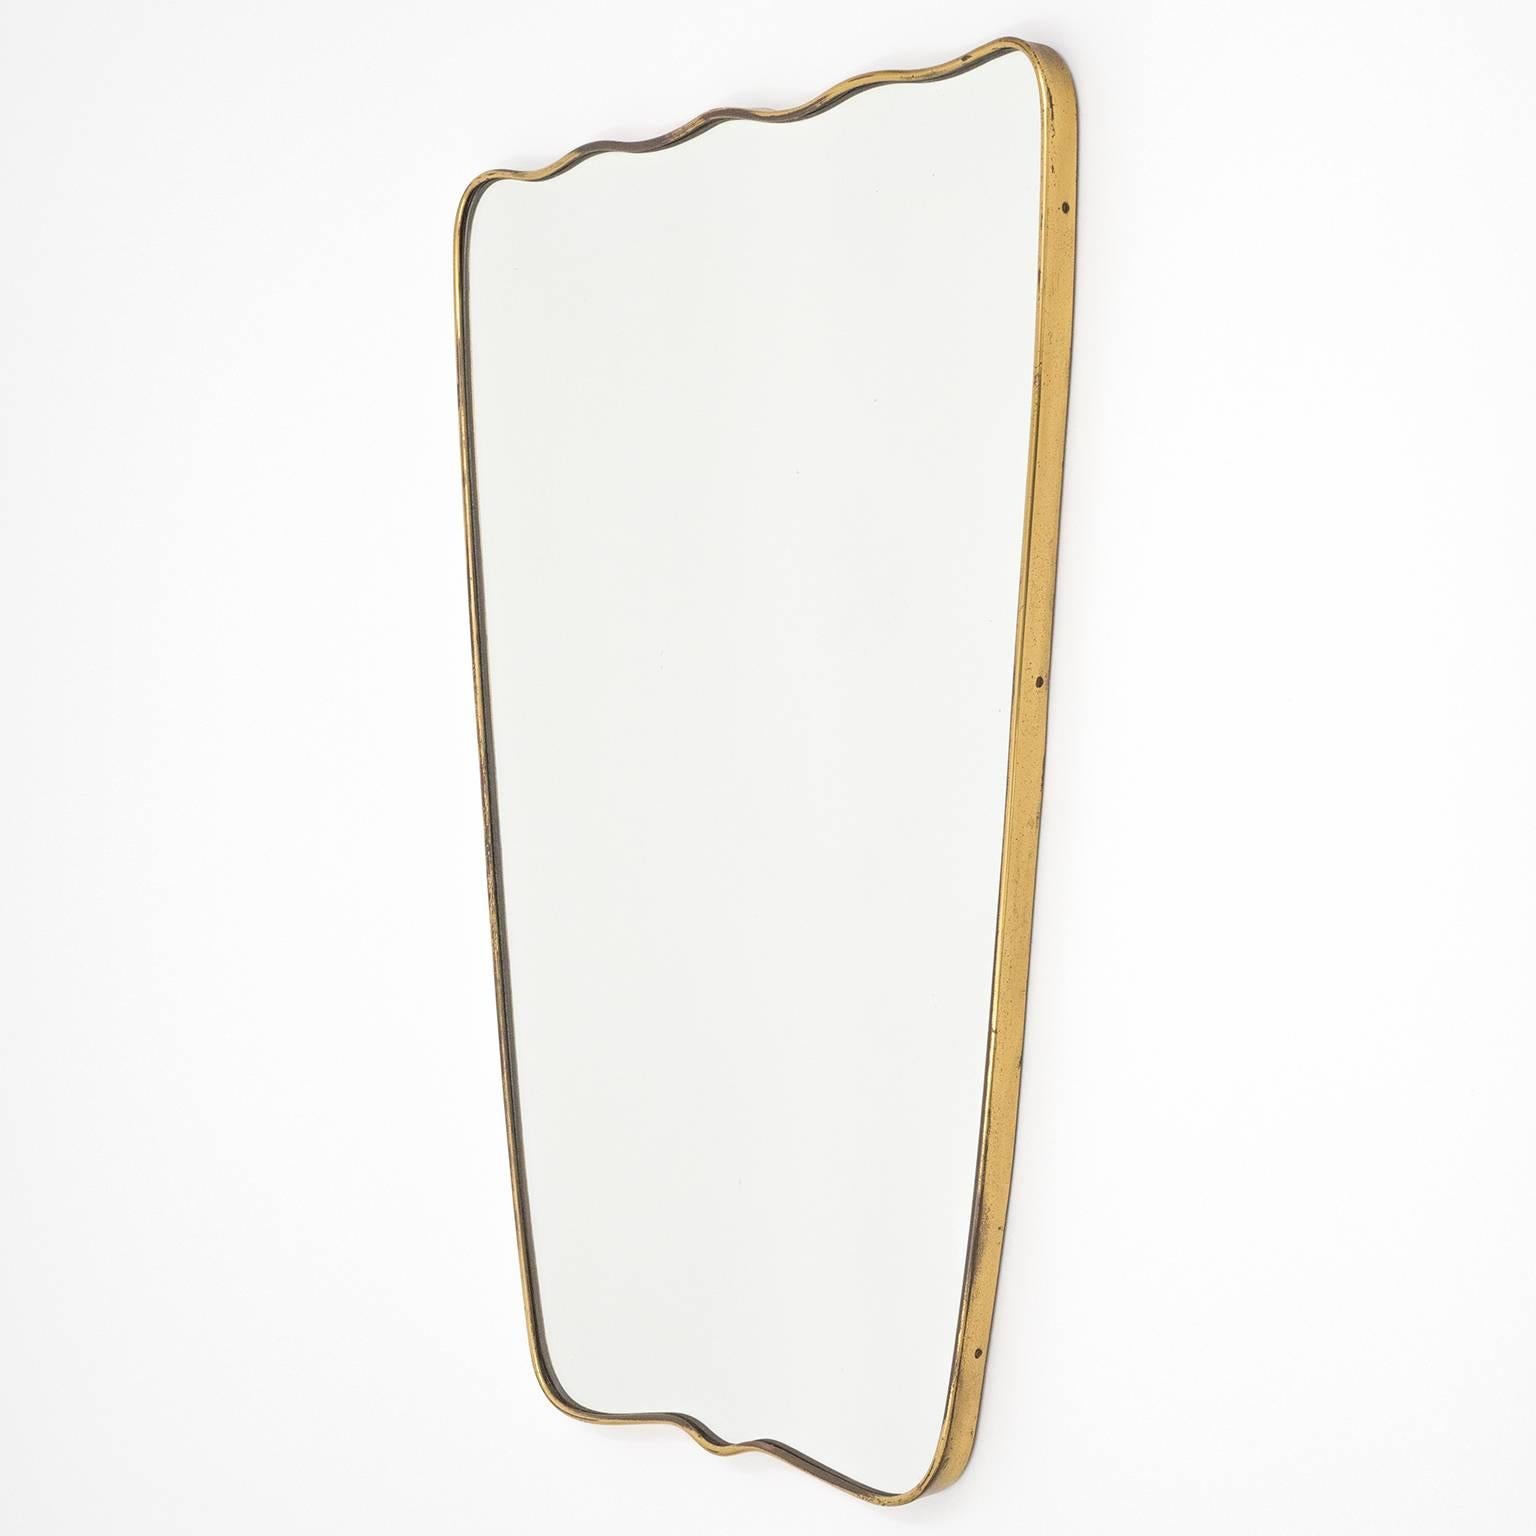 Very unique Gio Ponti style brass mirror from Italy, 1950s. The undulating top and bottom give this mirror a very special characteristic. Lovely original condition with a nice patina on the brass and a few specks in the mirror.